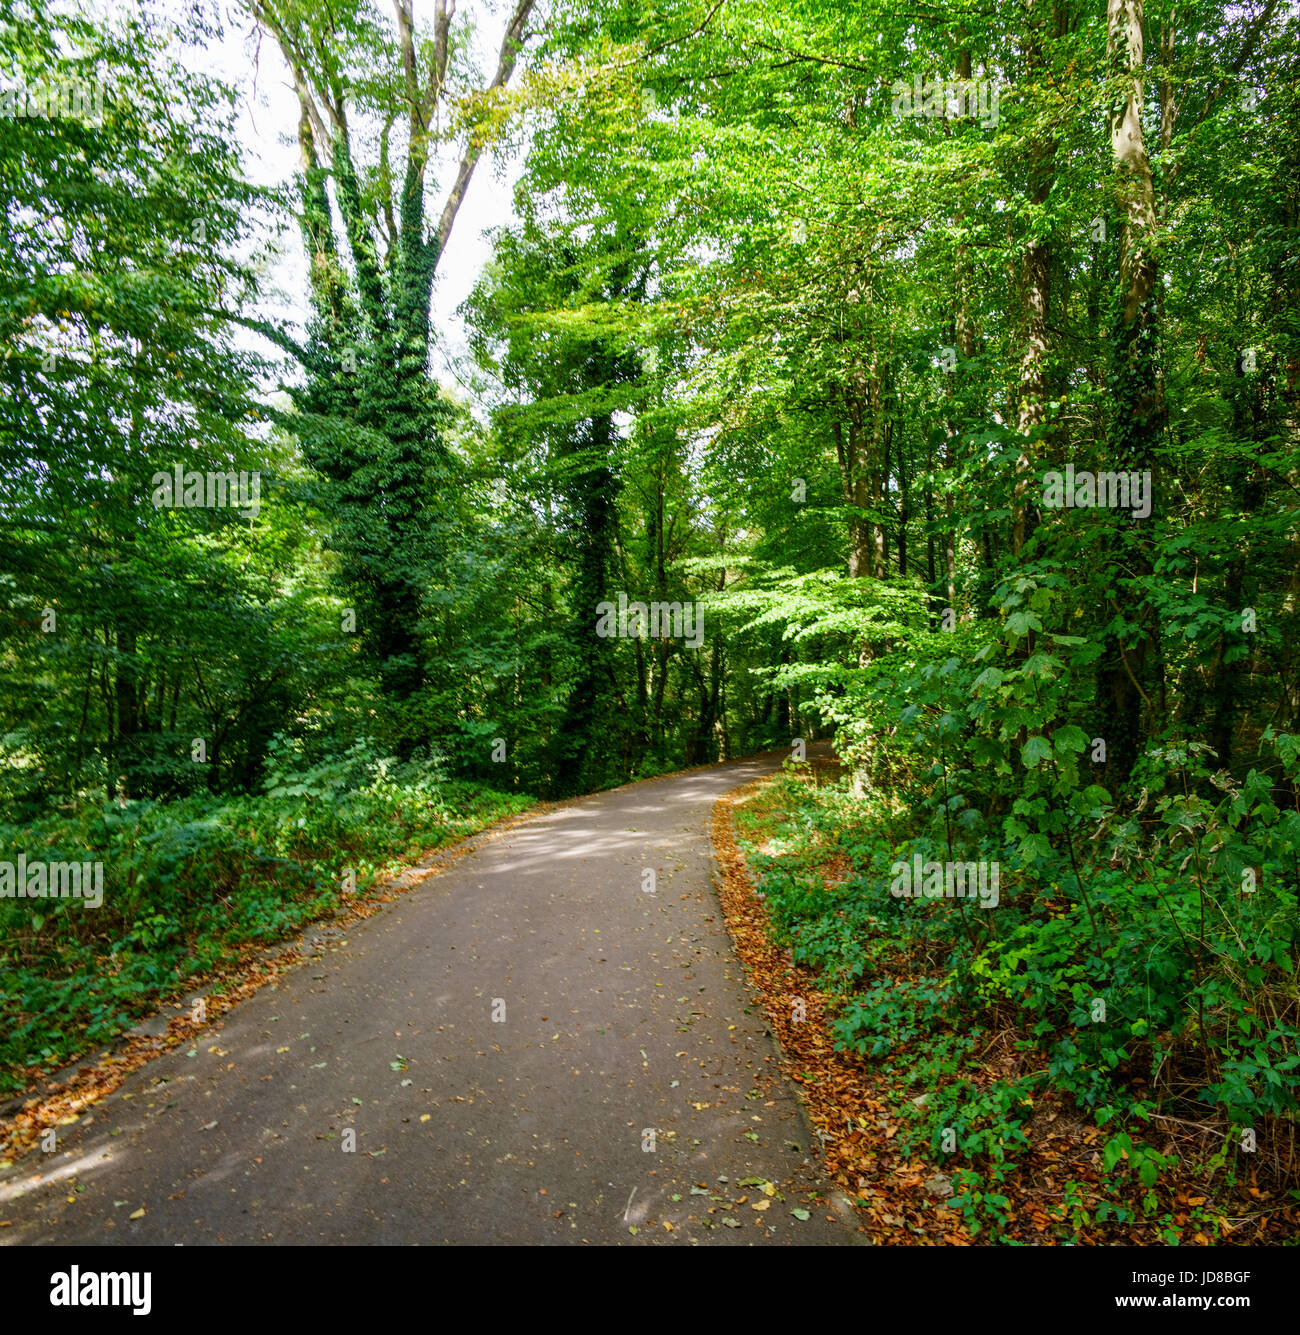 Rural road running through lush green forest with leaves on ground, Belgium. belgium europe Stock Photo